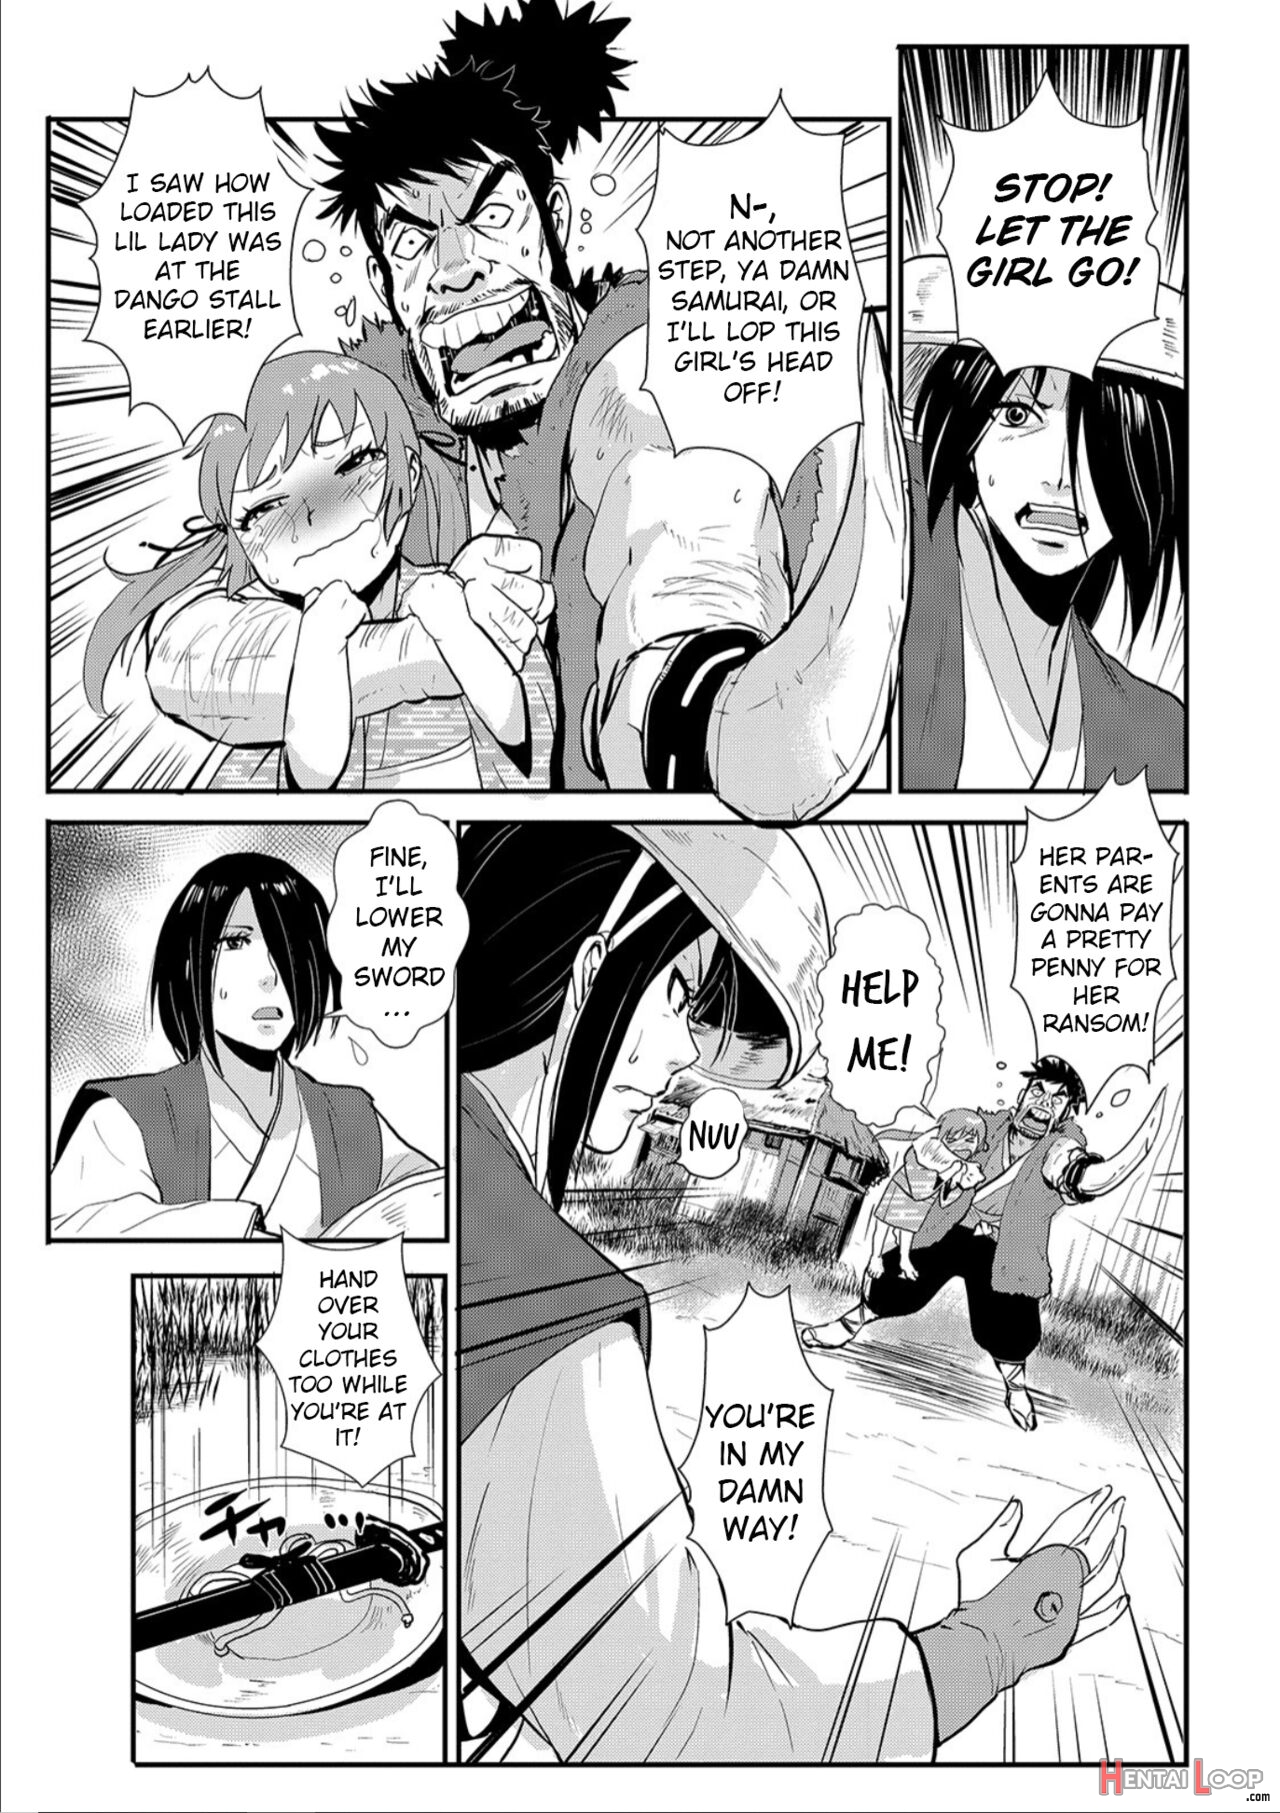 Knocked Up Samurai 01: A Woman’s Journey To Get Pregnant page 7